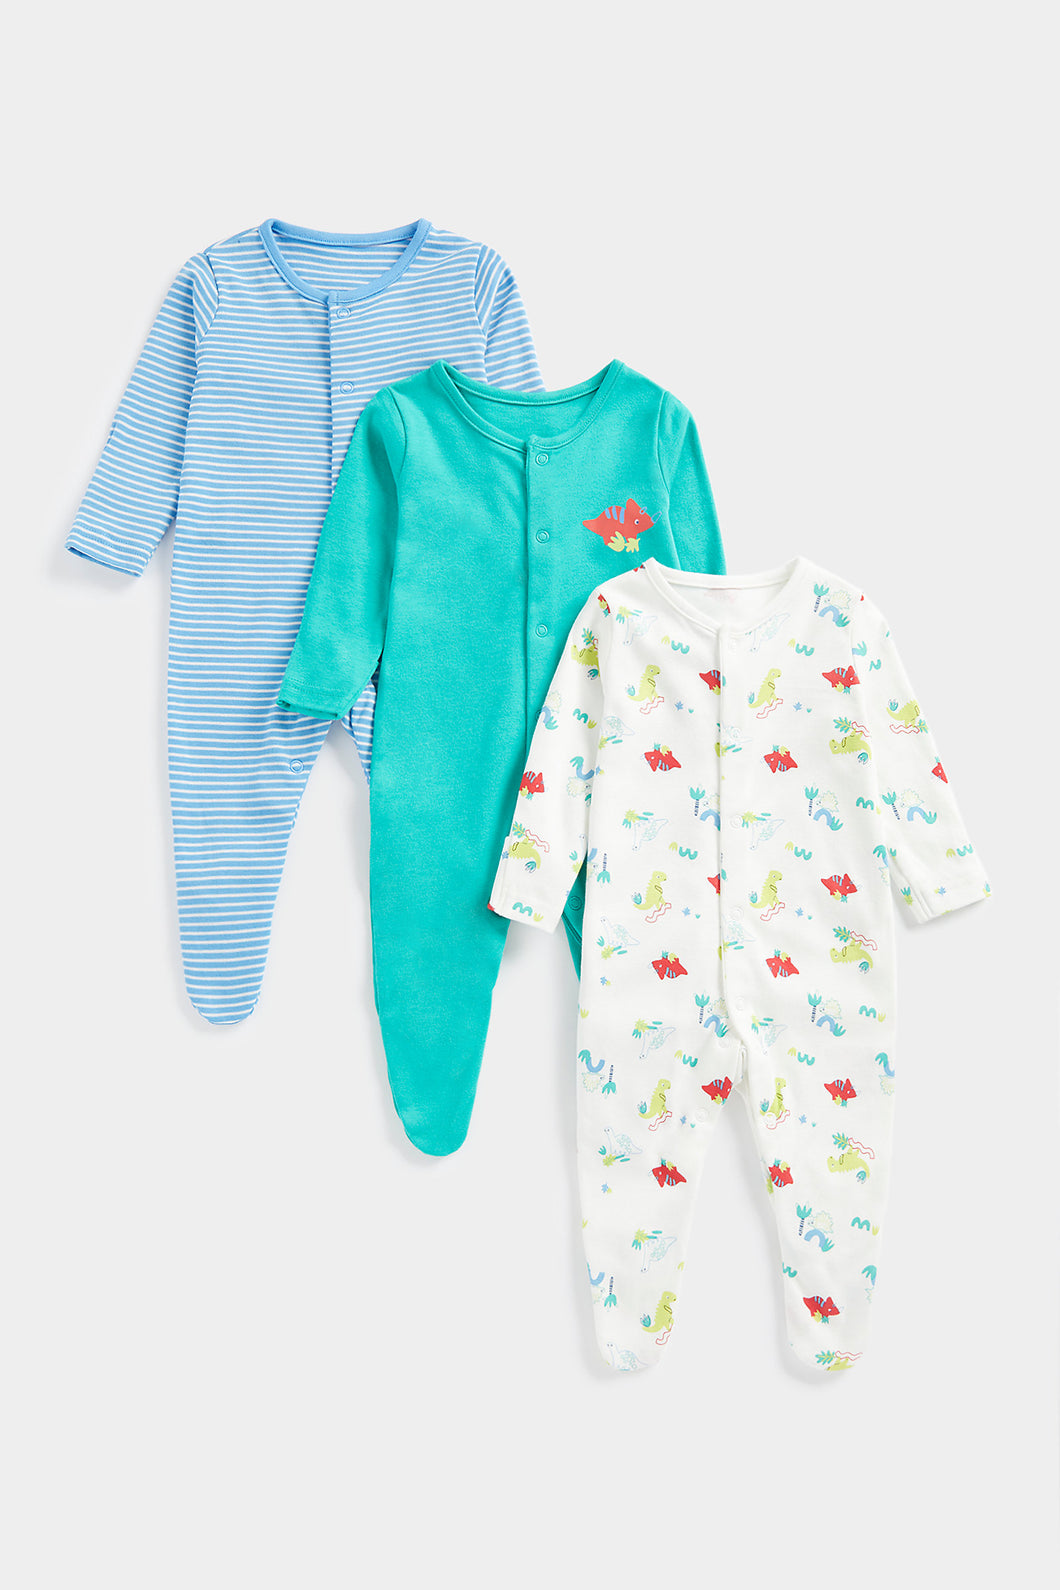 Mothercare Tropical Dino Sleepsuits - 3 Pack